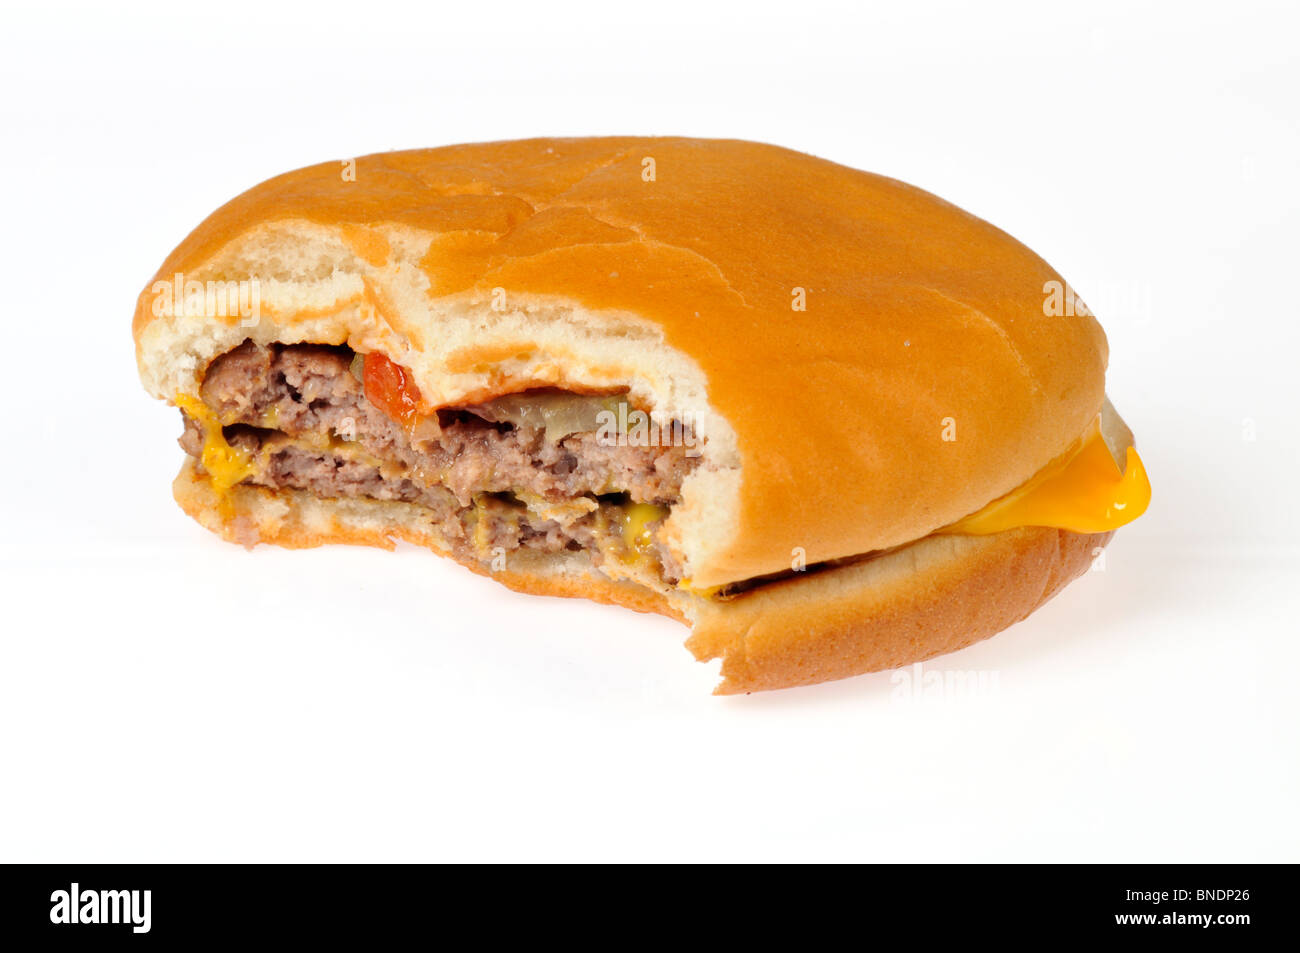 McDonalds double cheeseburger with bite missing cutout Stock Photo